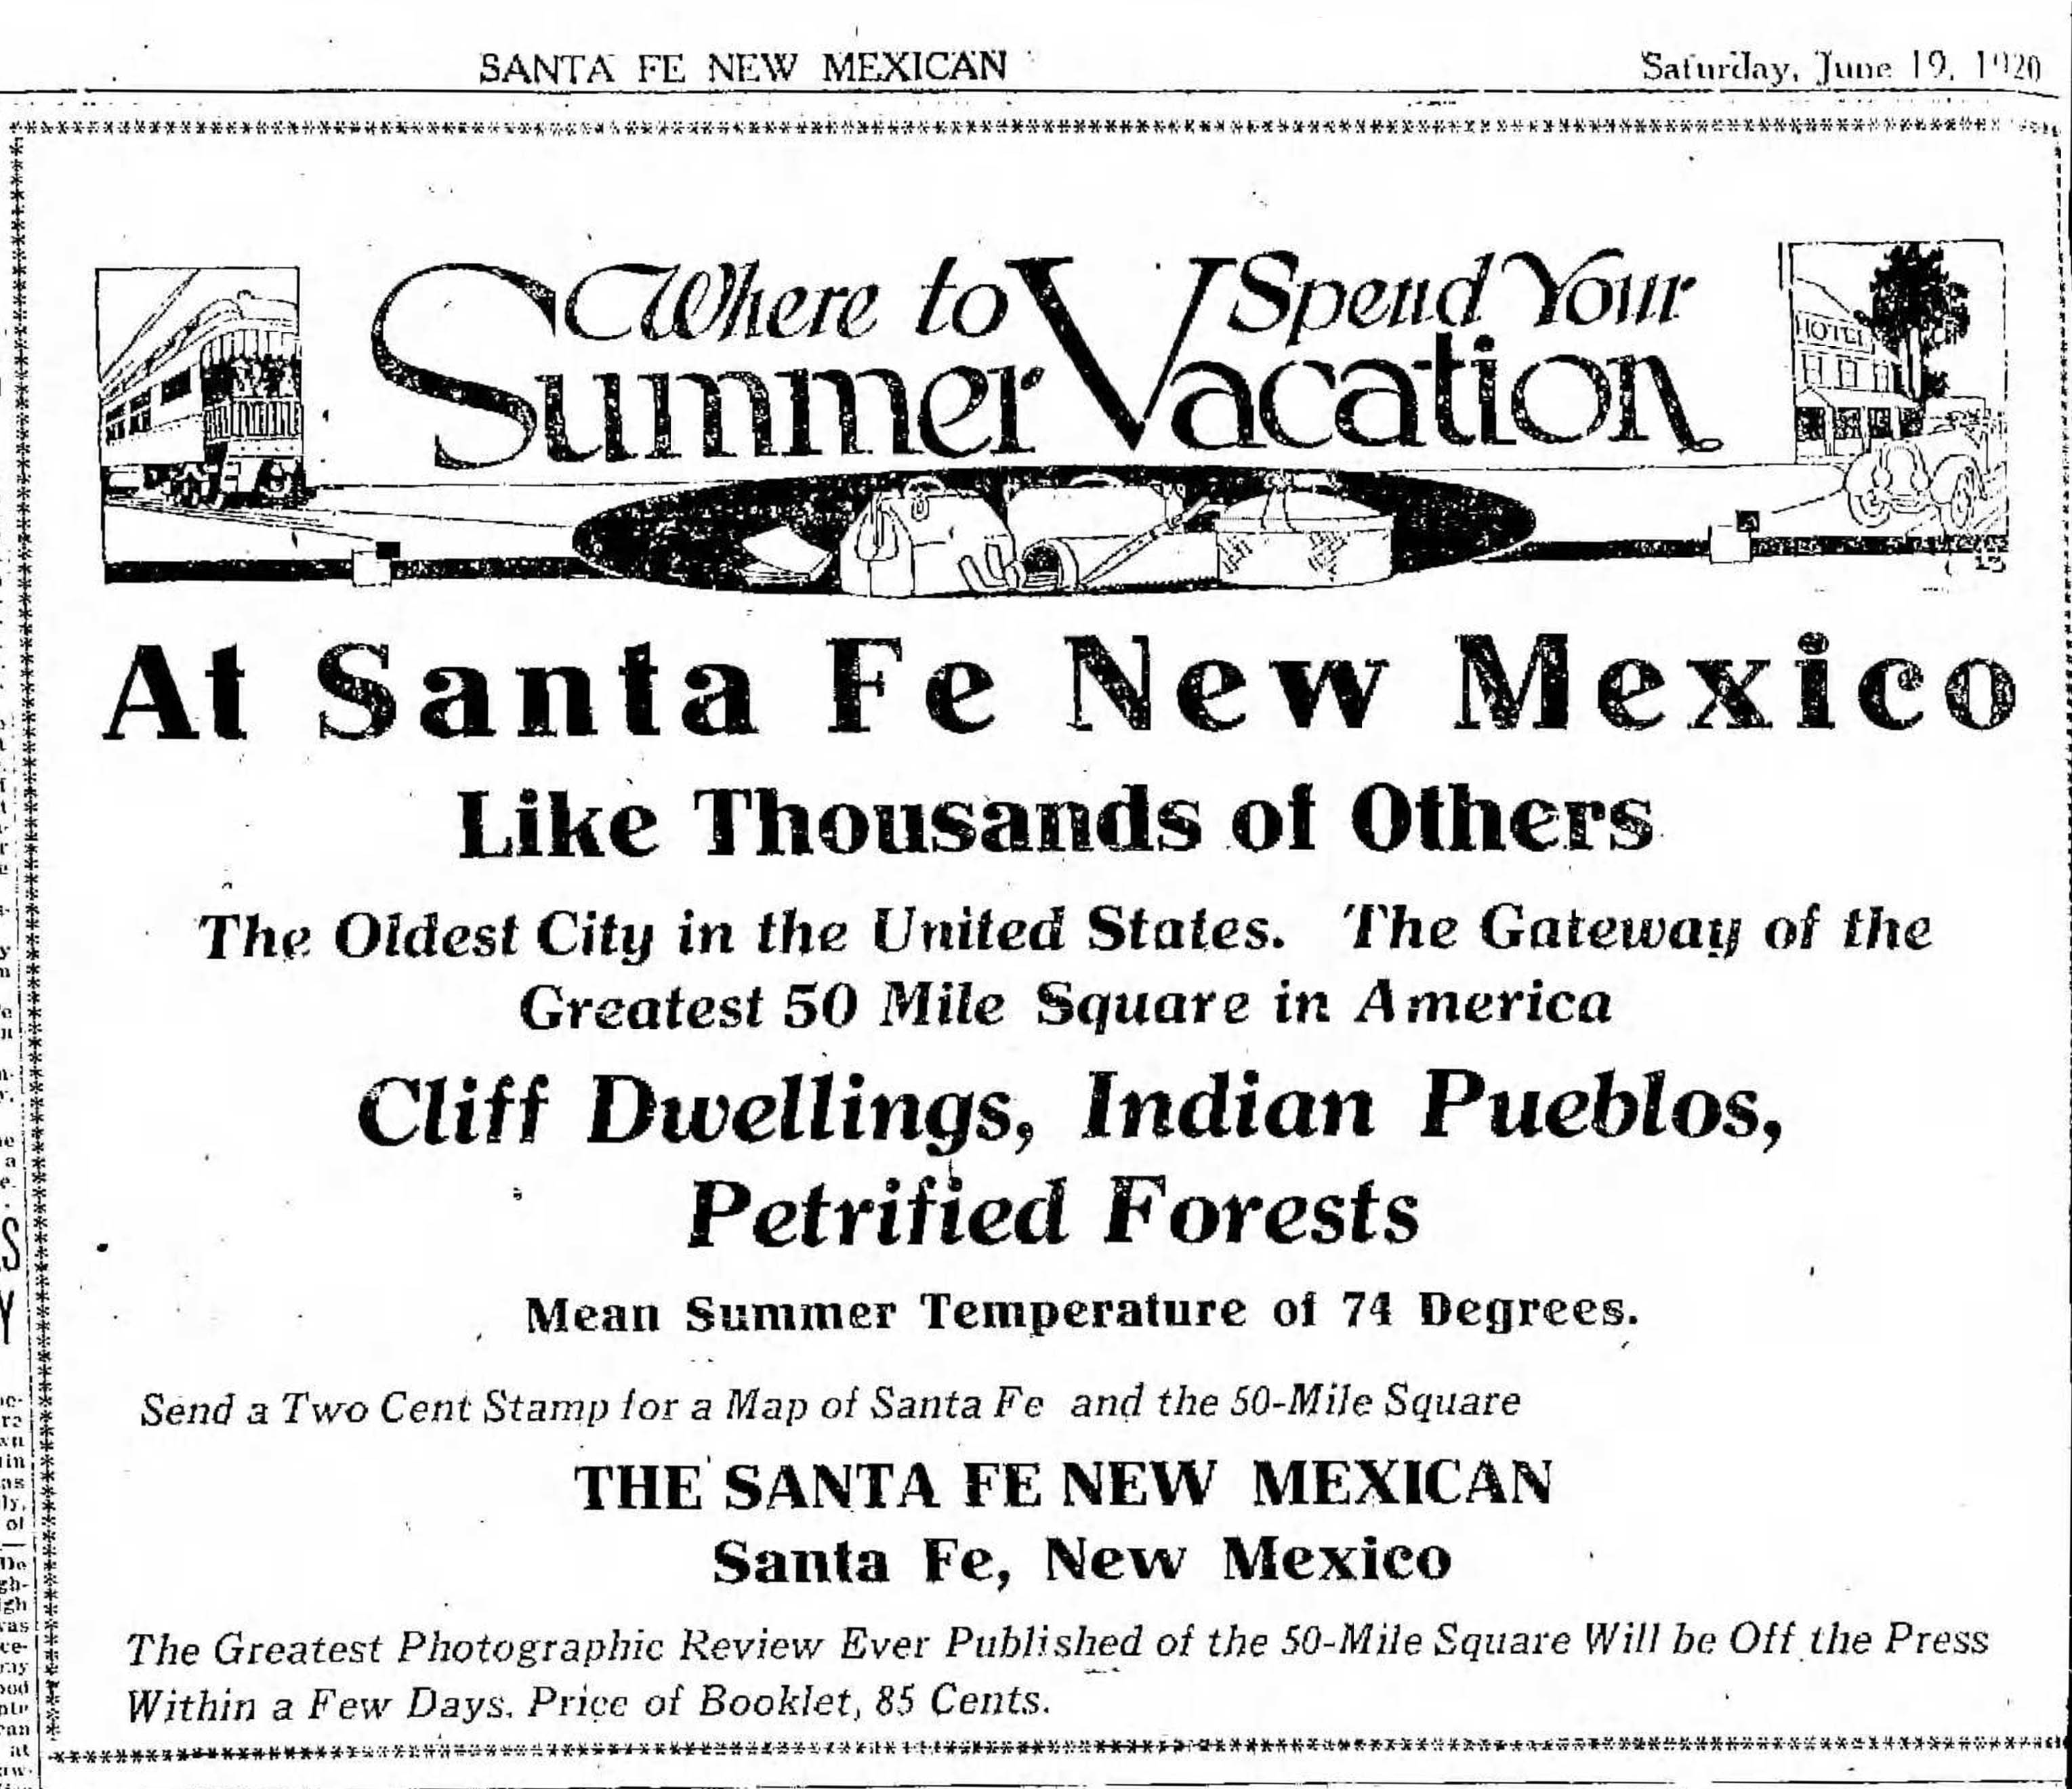 An ad from the Santa Fe New Mexican, June 19th, 1920.